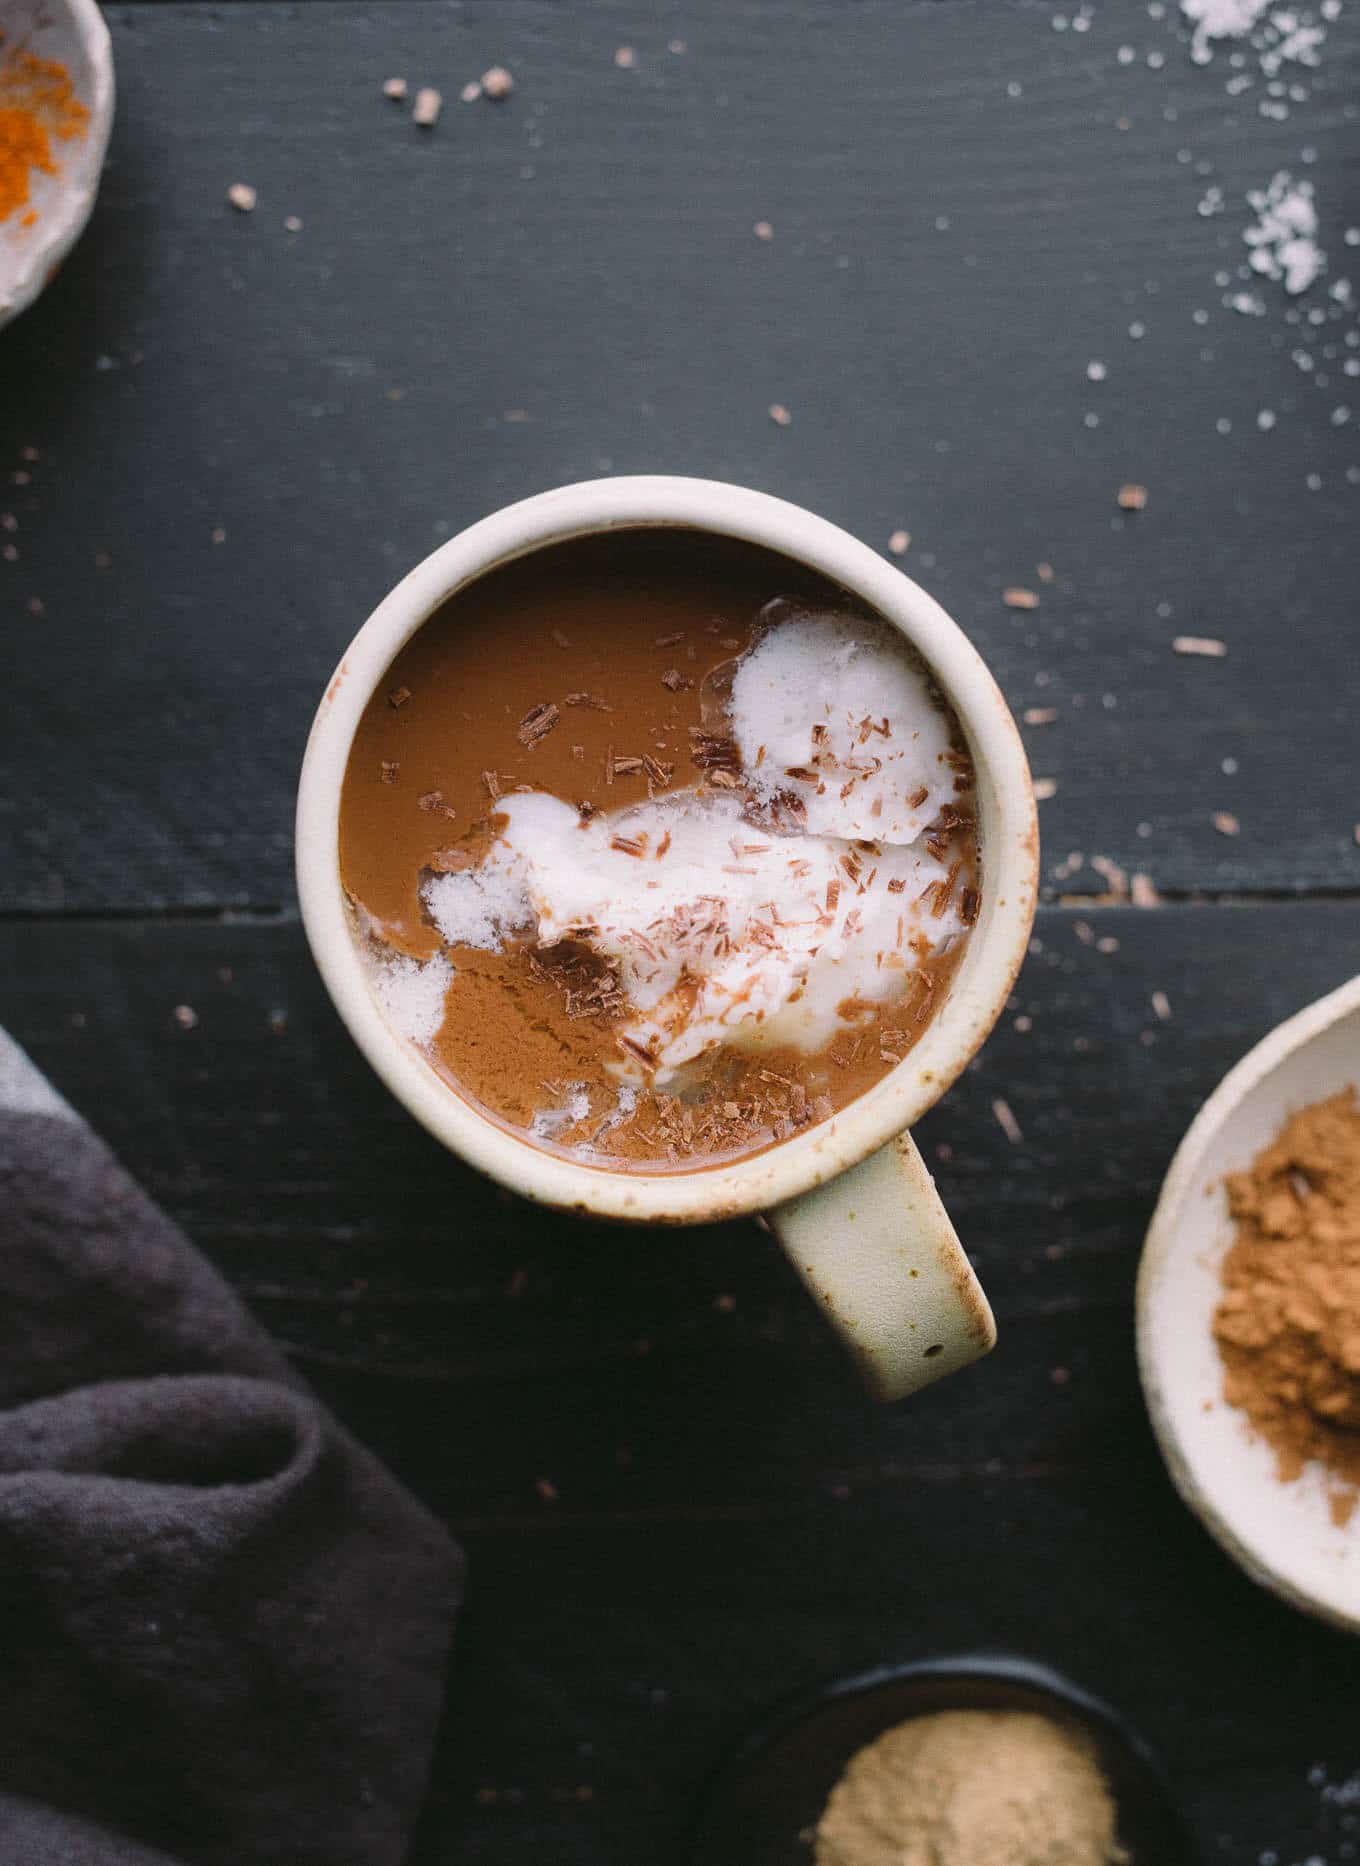 A mug of hot cocoa topped with coconut cream and chocolate shavings.